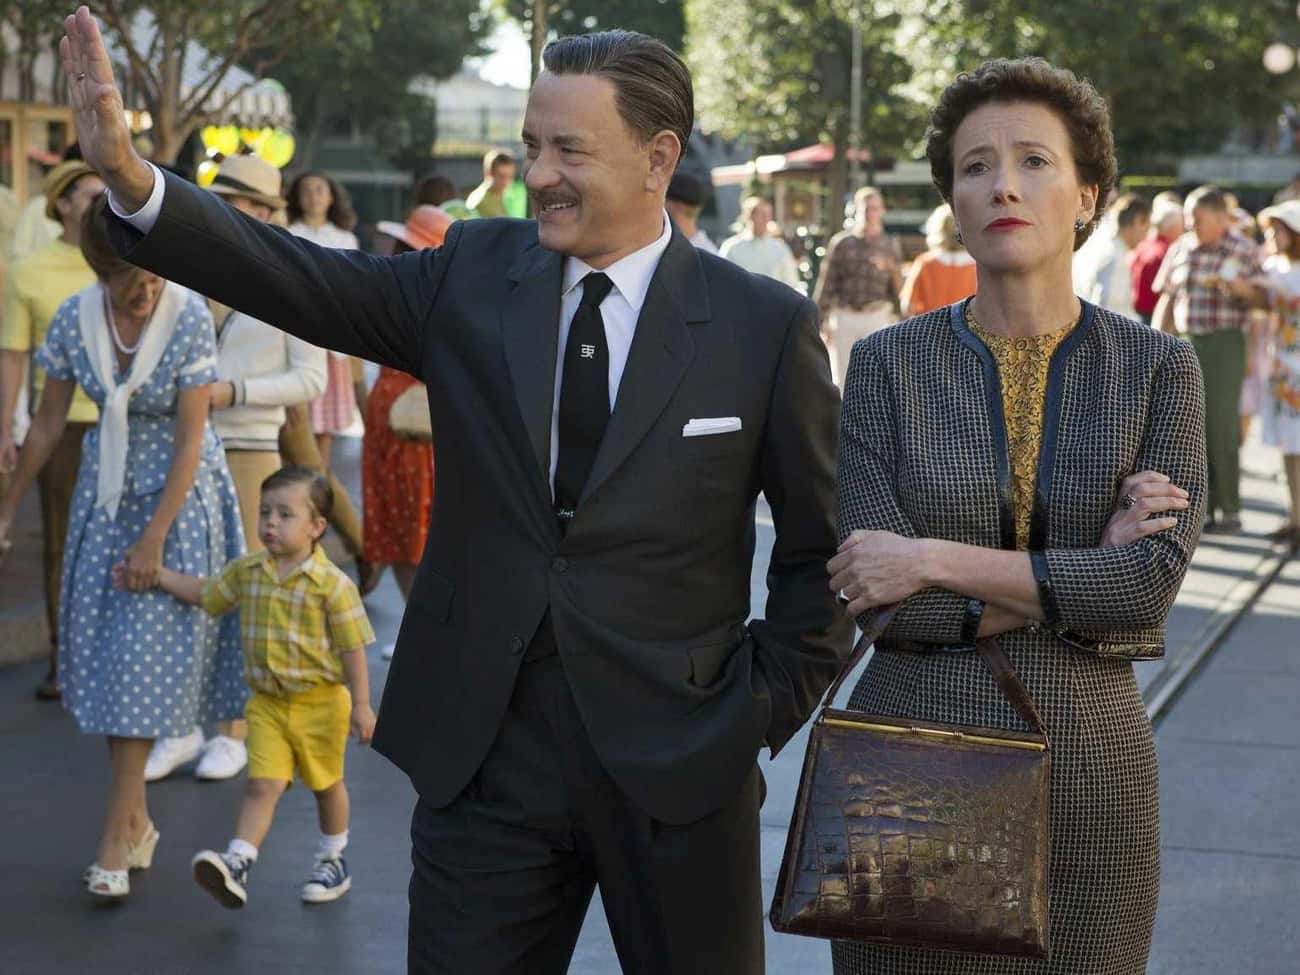 'Poppins' Author P.L. Travers Hated The Finished Film And Demanded It Be Re-Edited 